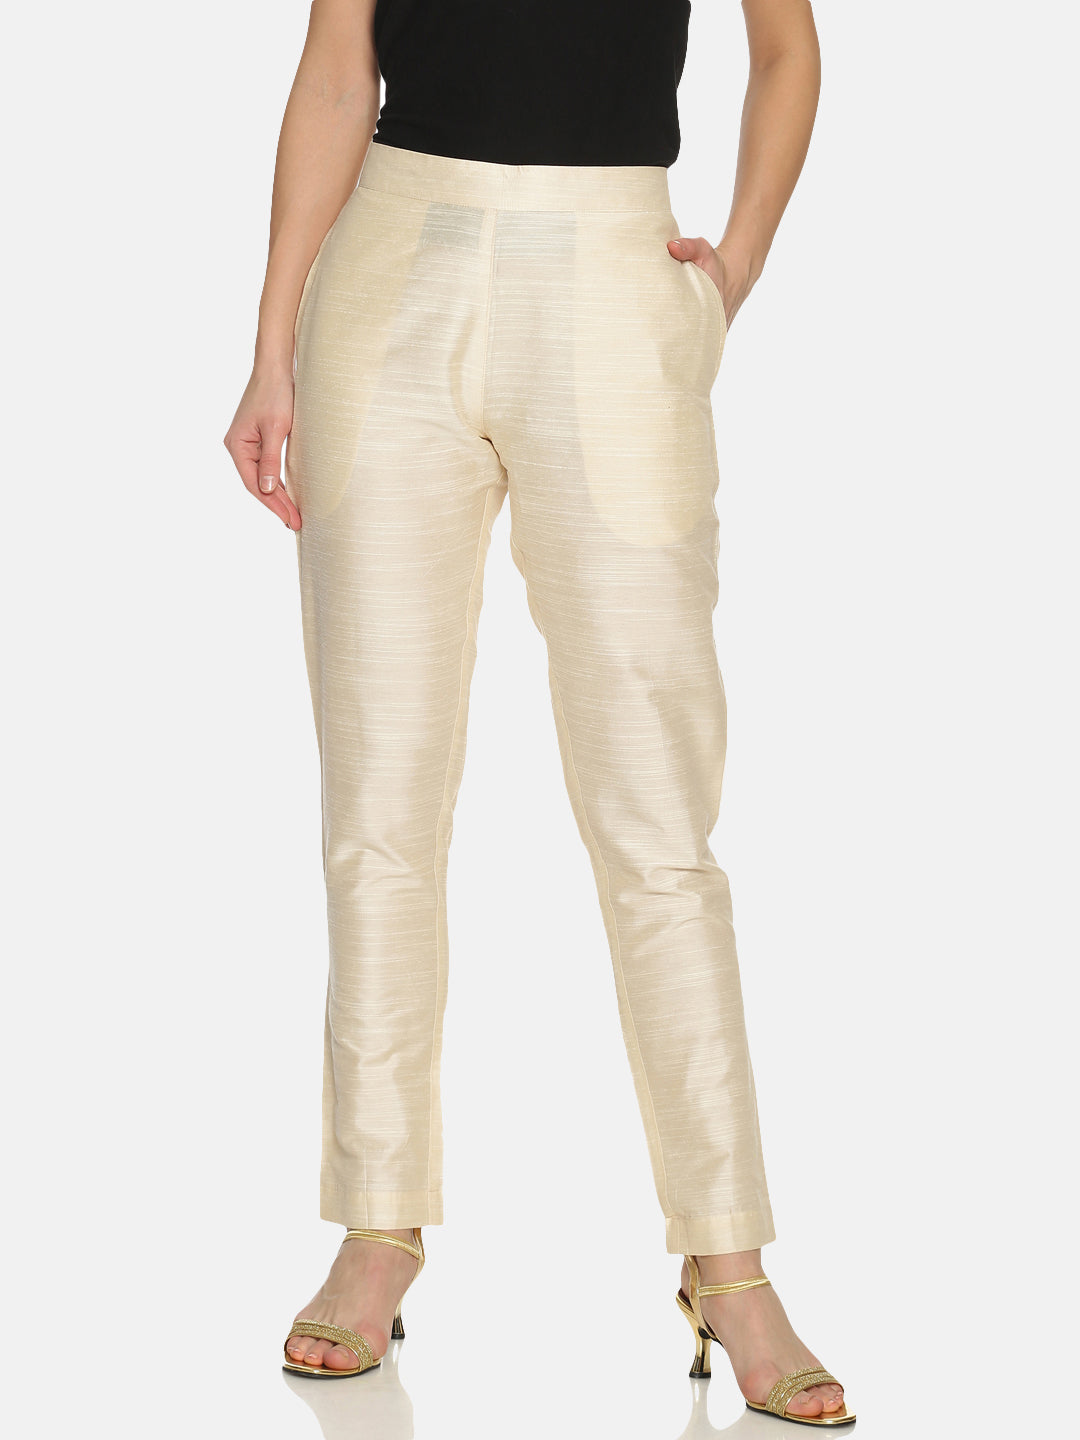 Pack of 2 White & Off White Art Silk Trousers